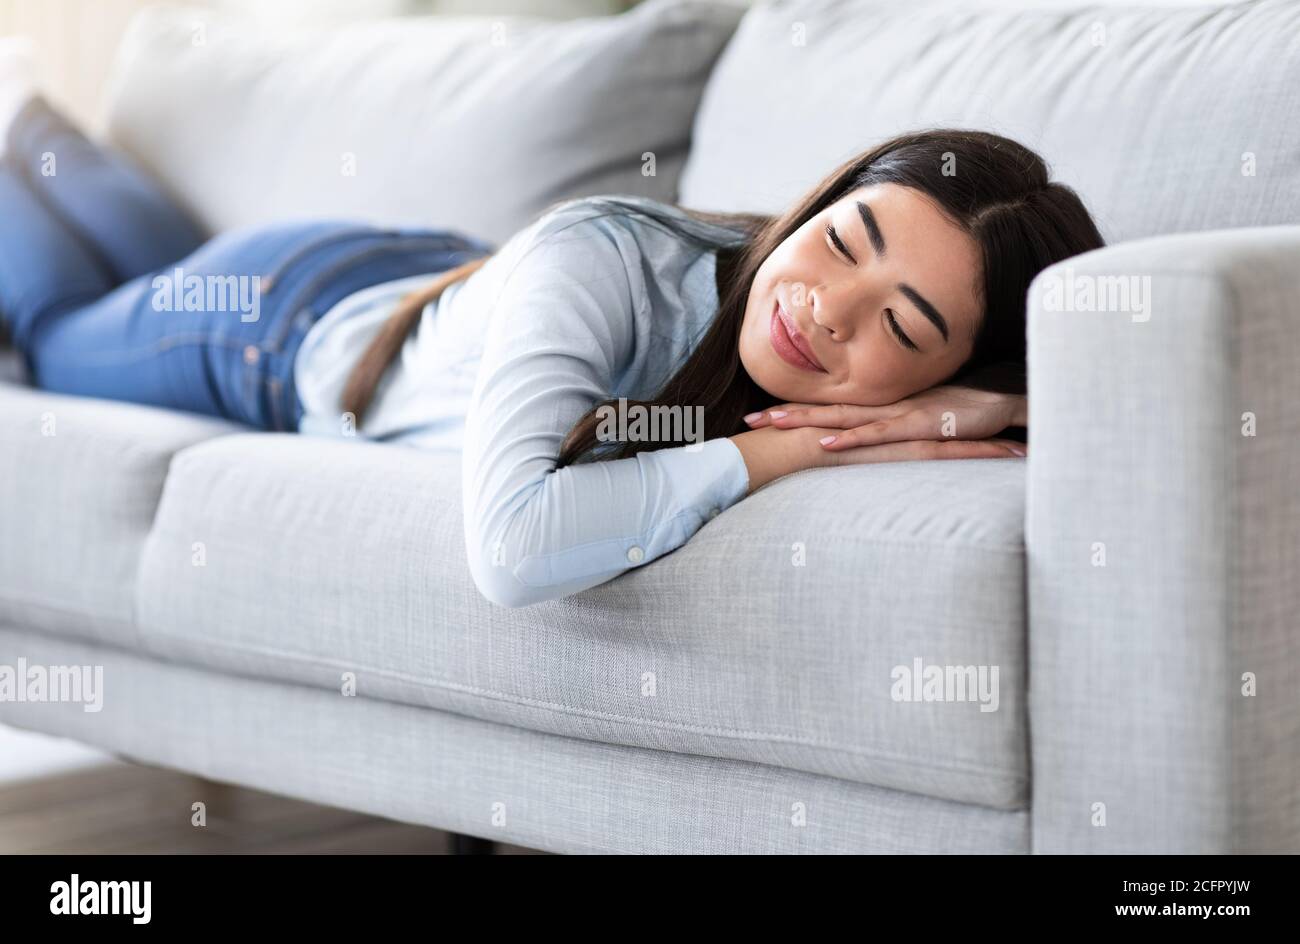 Lazy Day At Home. Relaxed Asian Girl Enjoying Lying On Comfortable Sofa Stock Photo